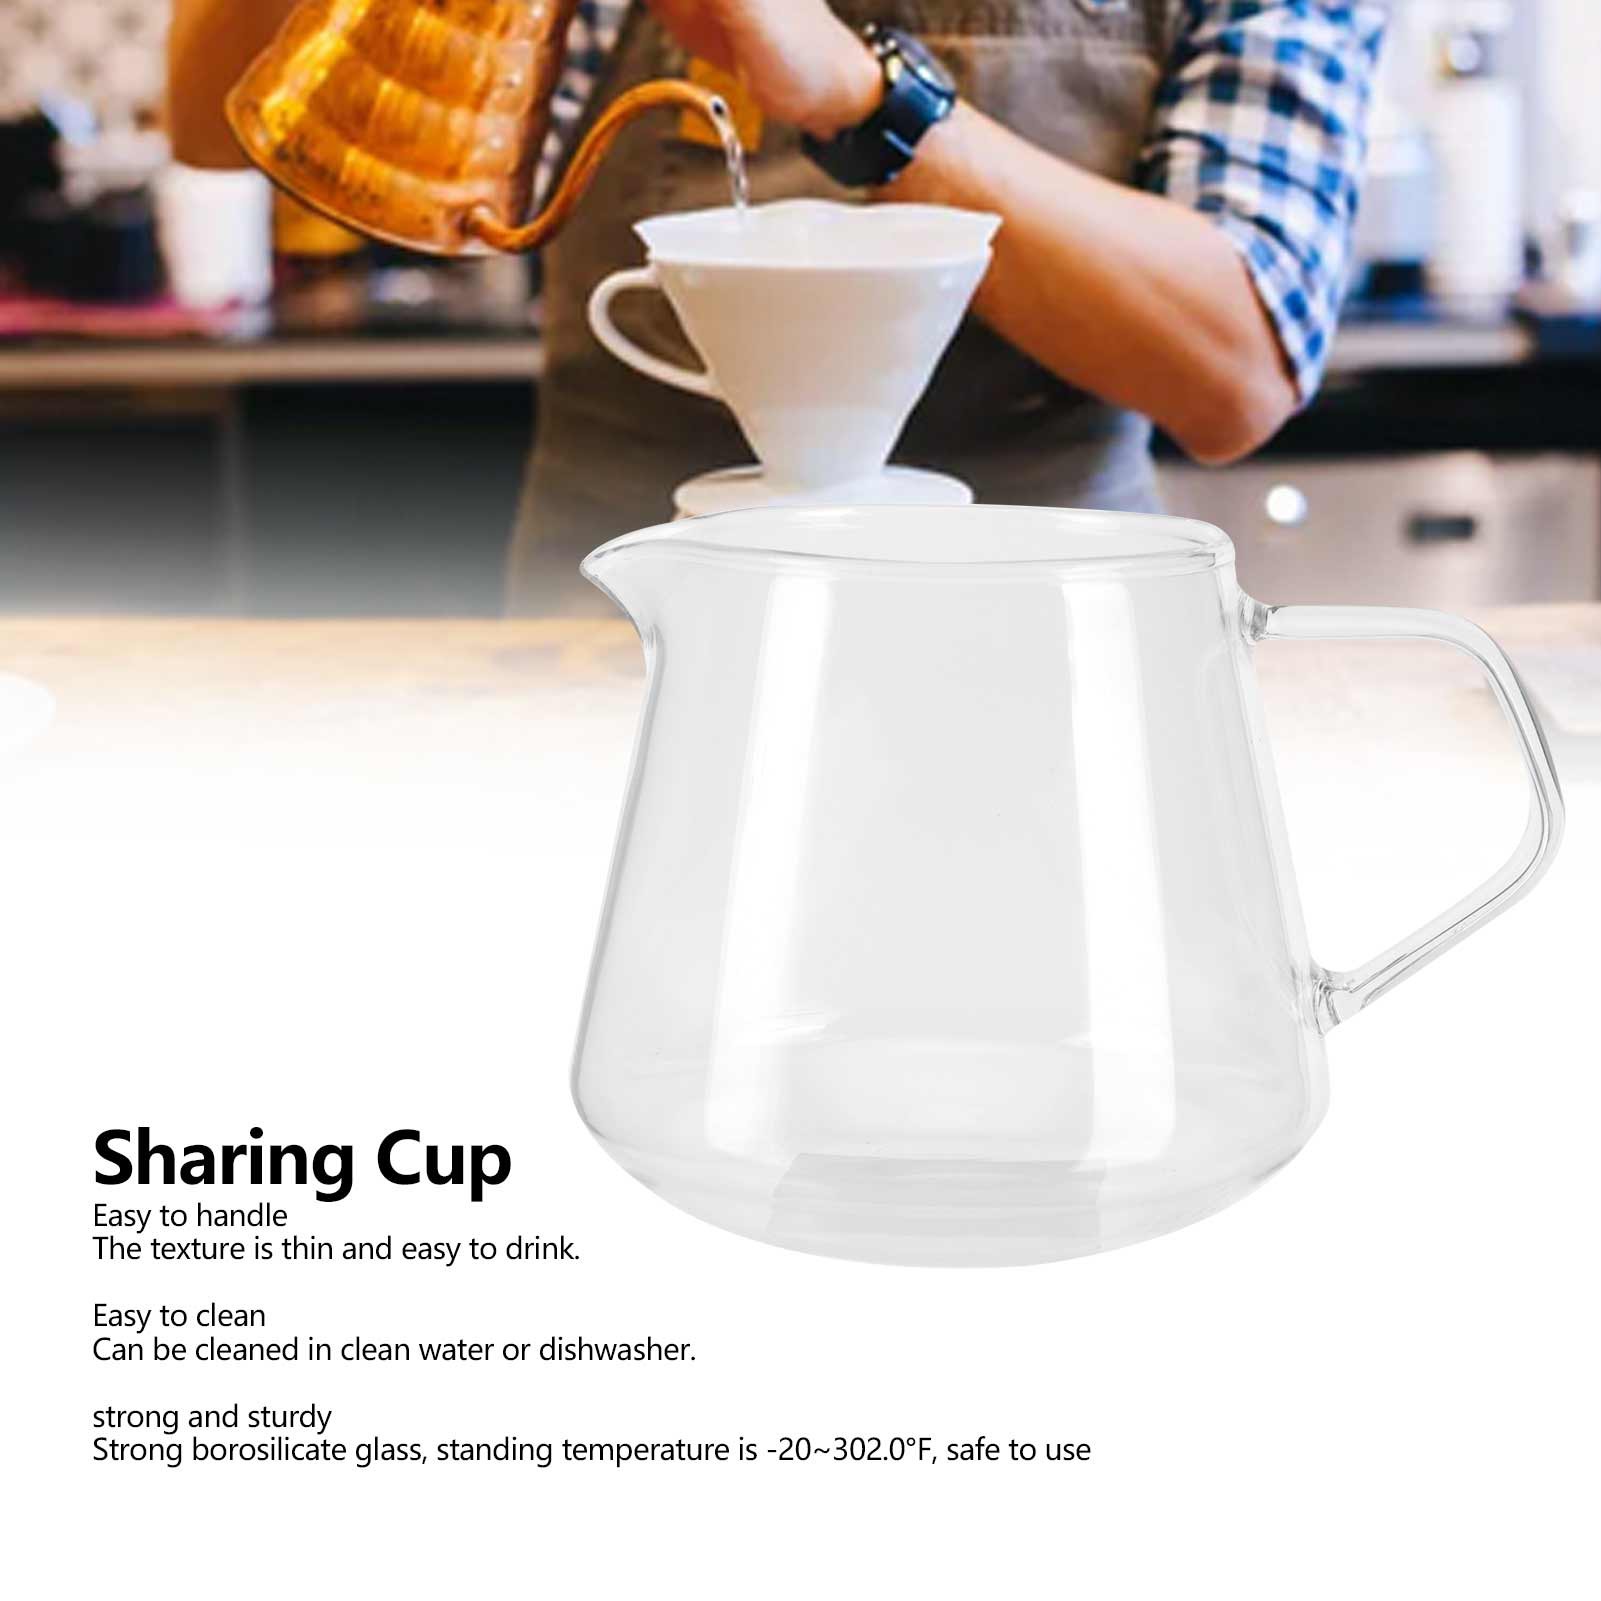 Allinit Transparent Cup High Borosilicate Glass Coffee Sharing Anti‑Scalding for Drinking Tea